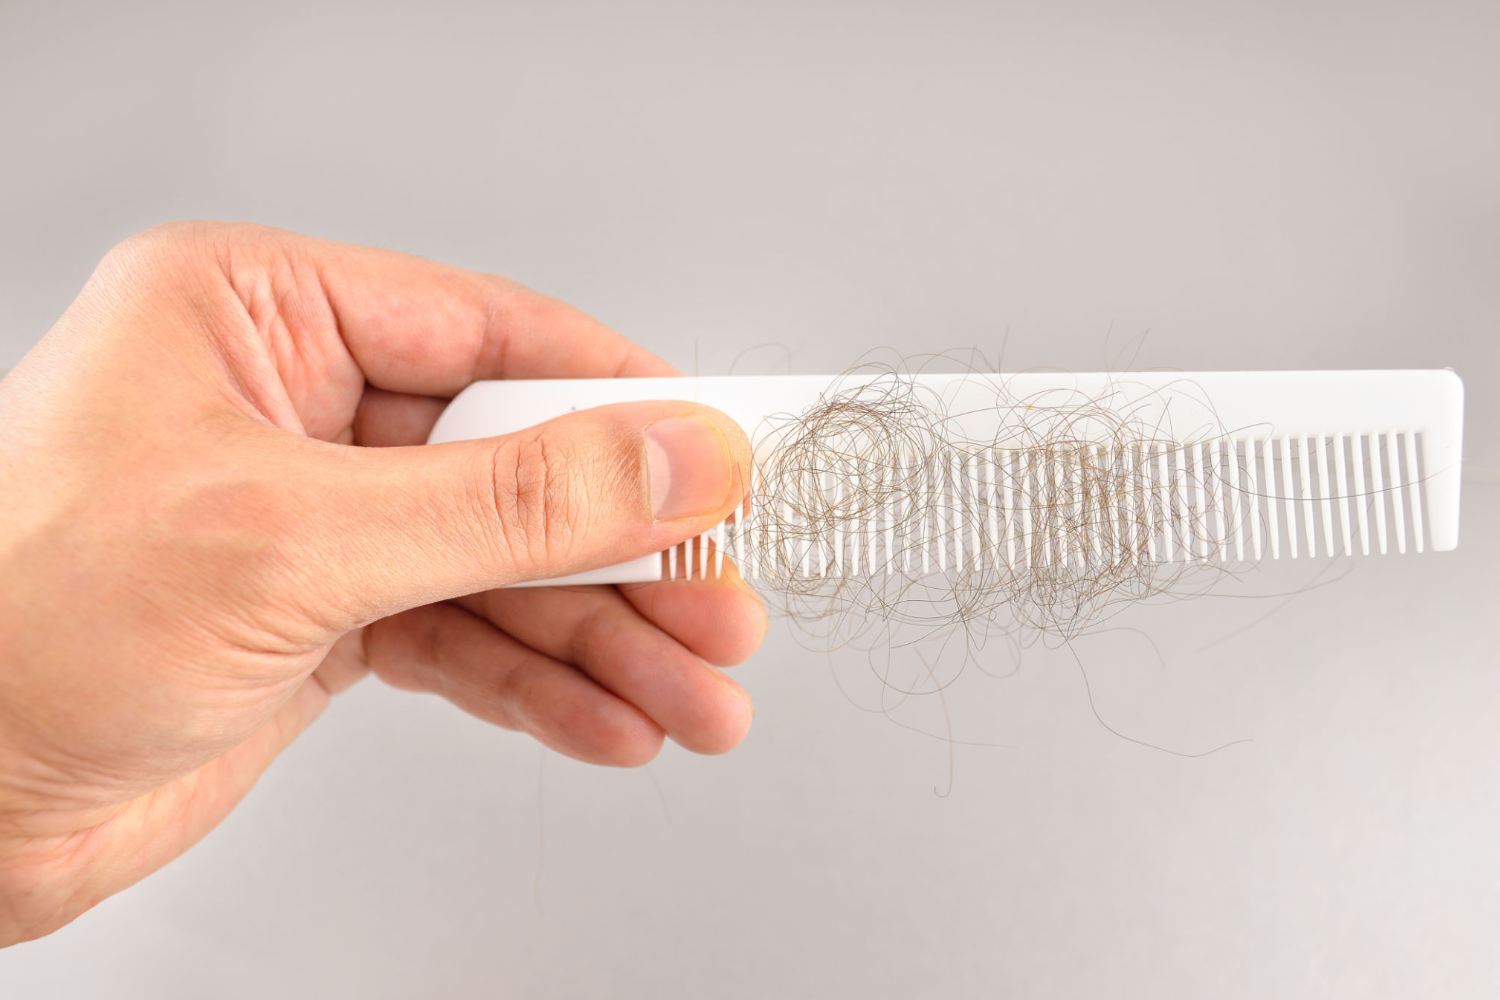 7 Common Hair Combing Mistakes That Can Damage Your Hair